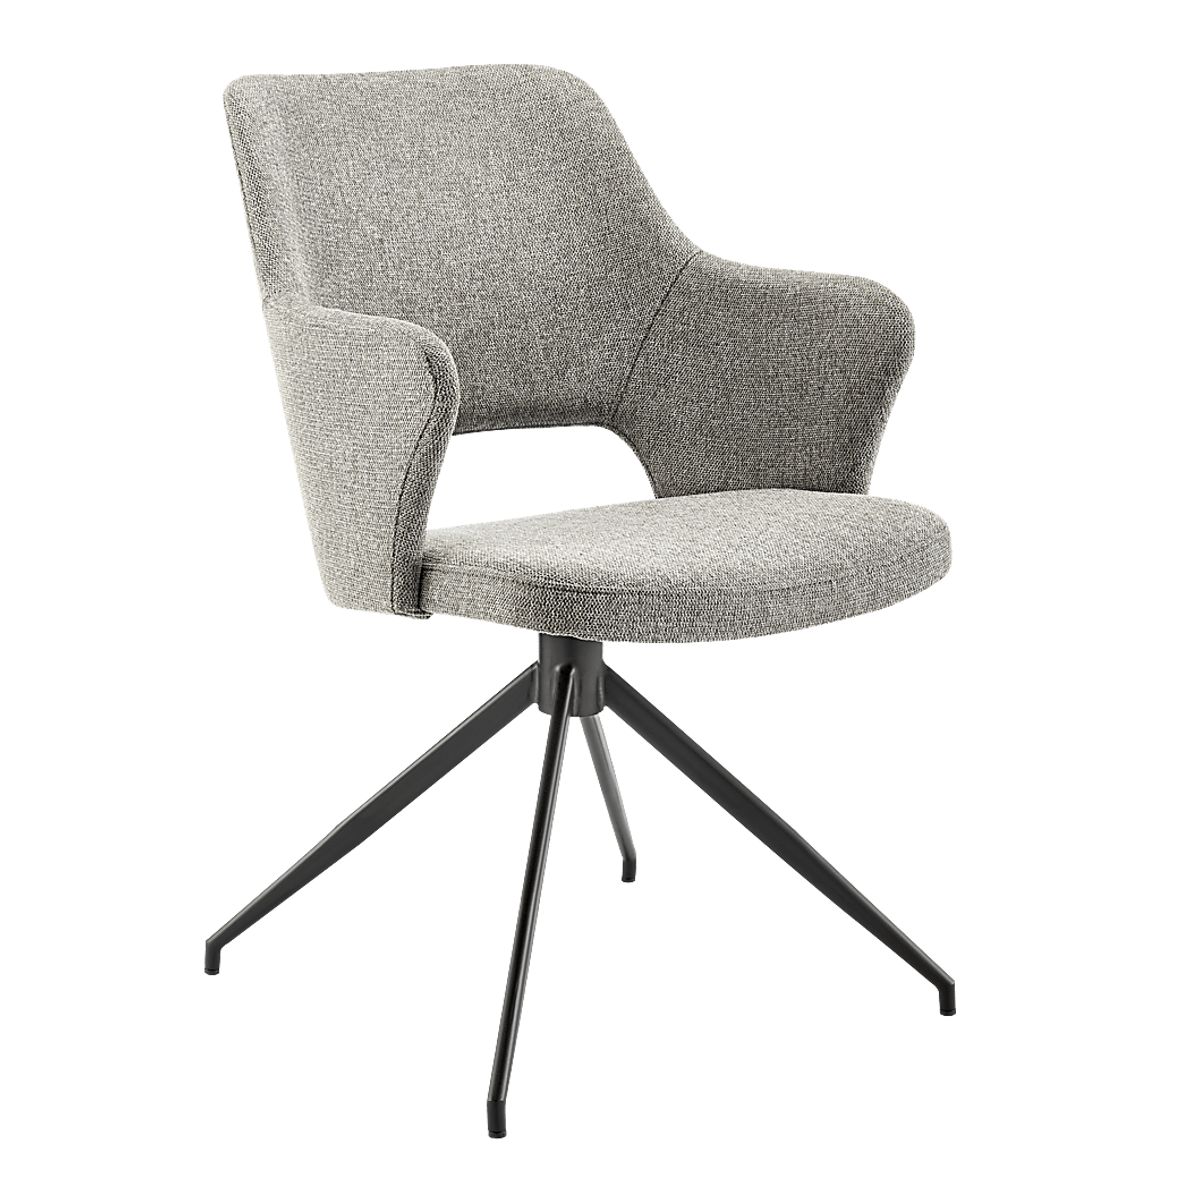 Quiment Light Gray Arm Chair